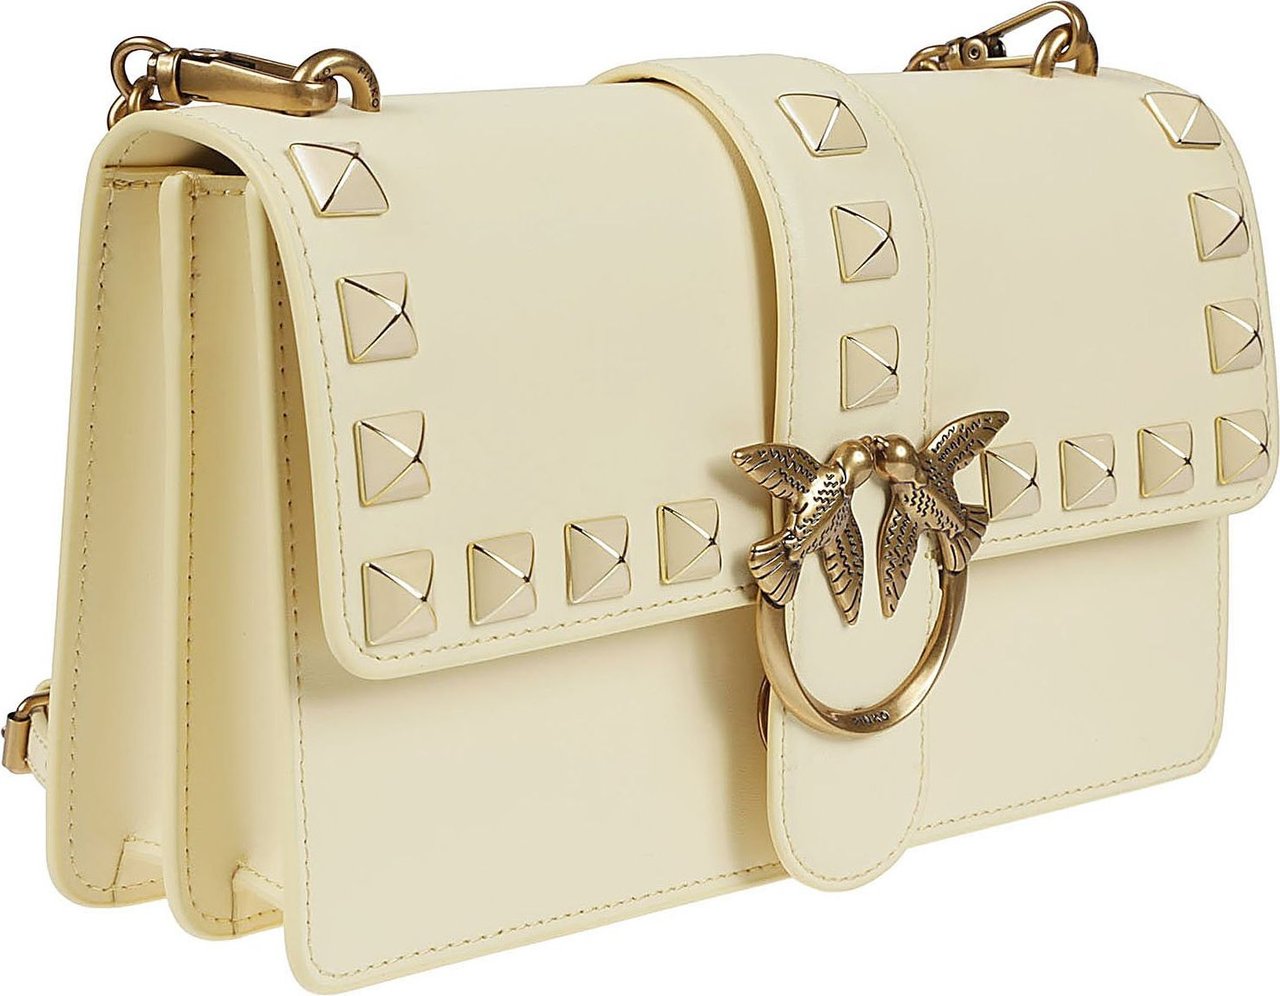 Pinko Love One Classic Simply Bag White Wit